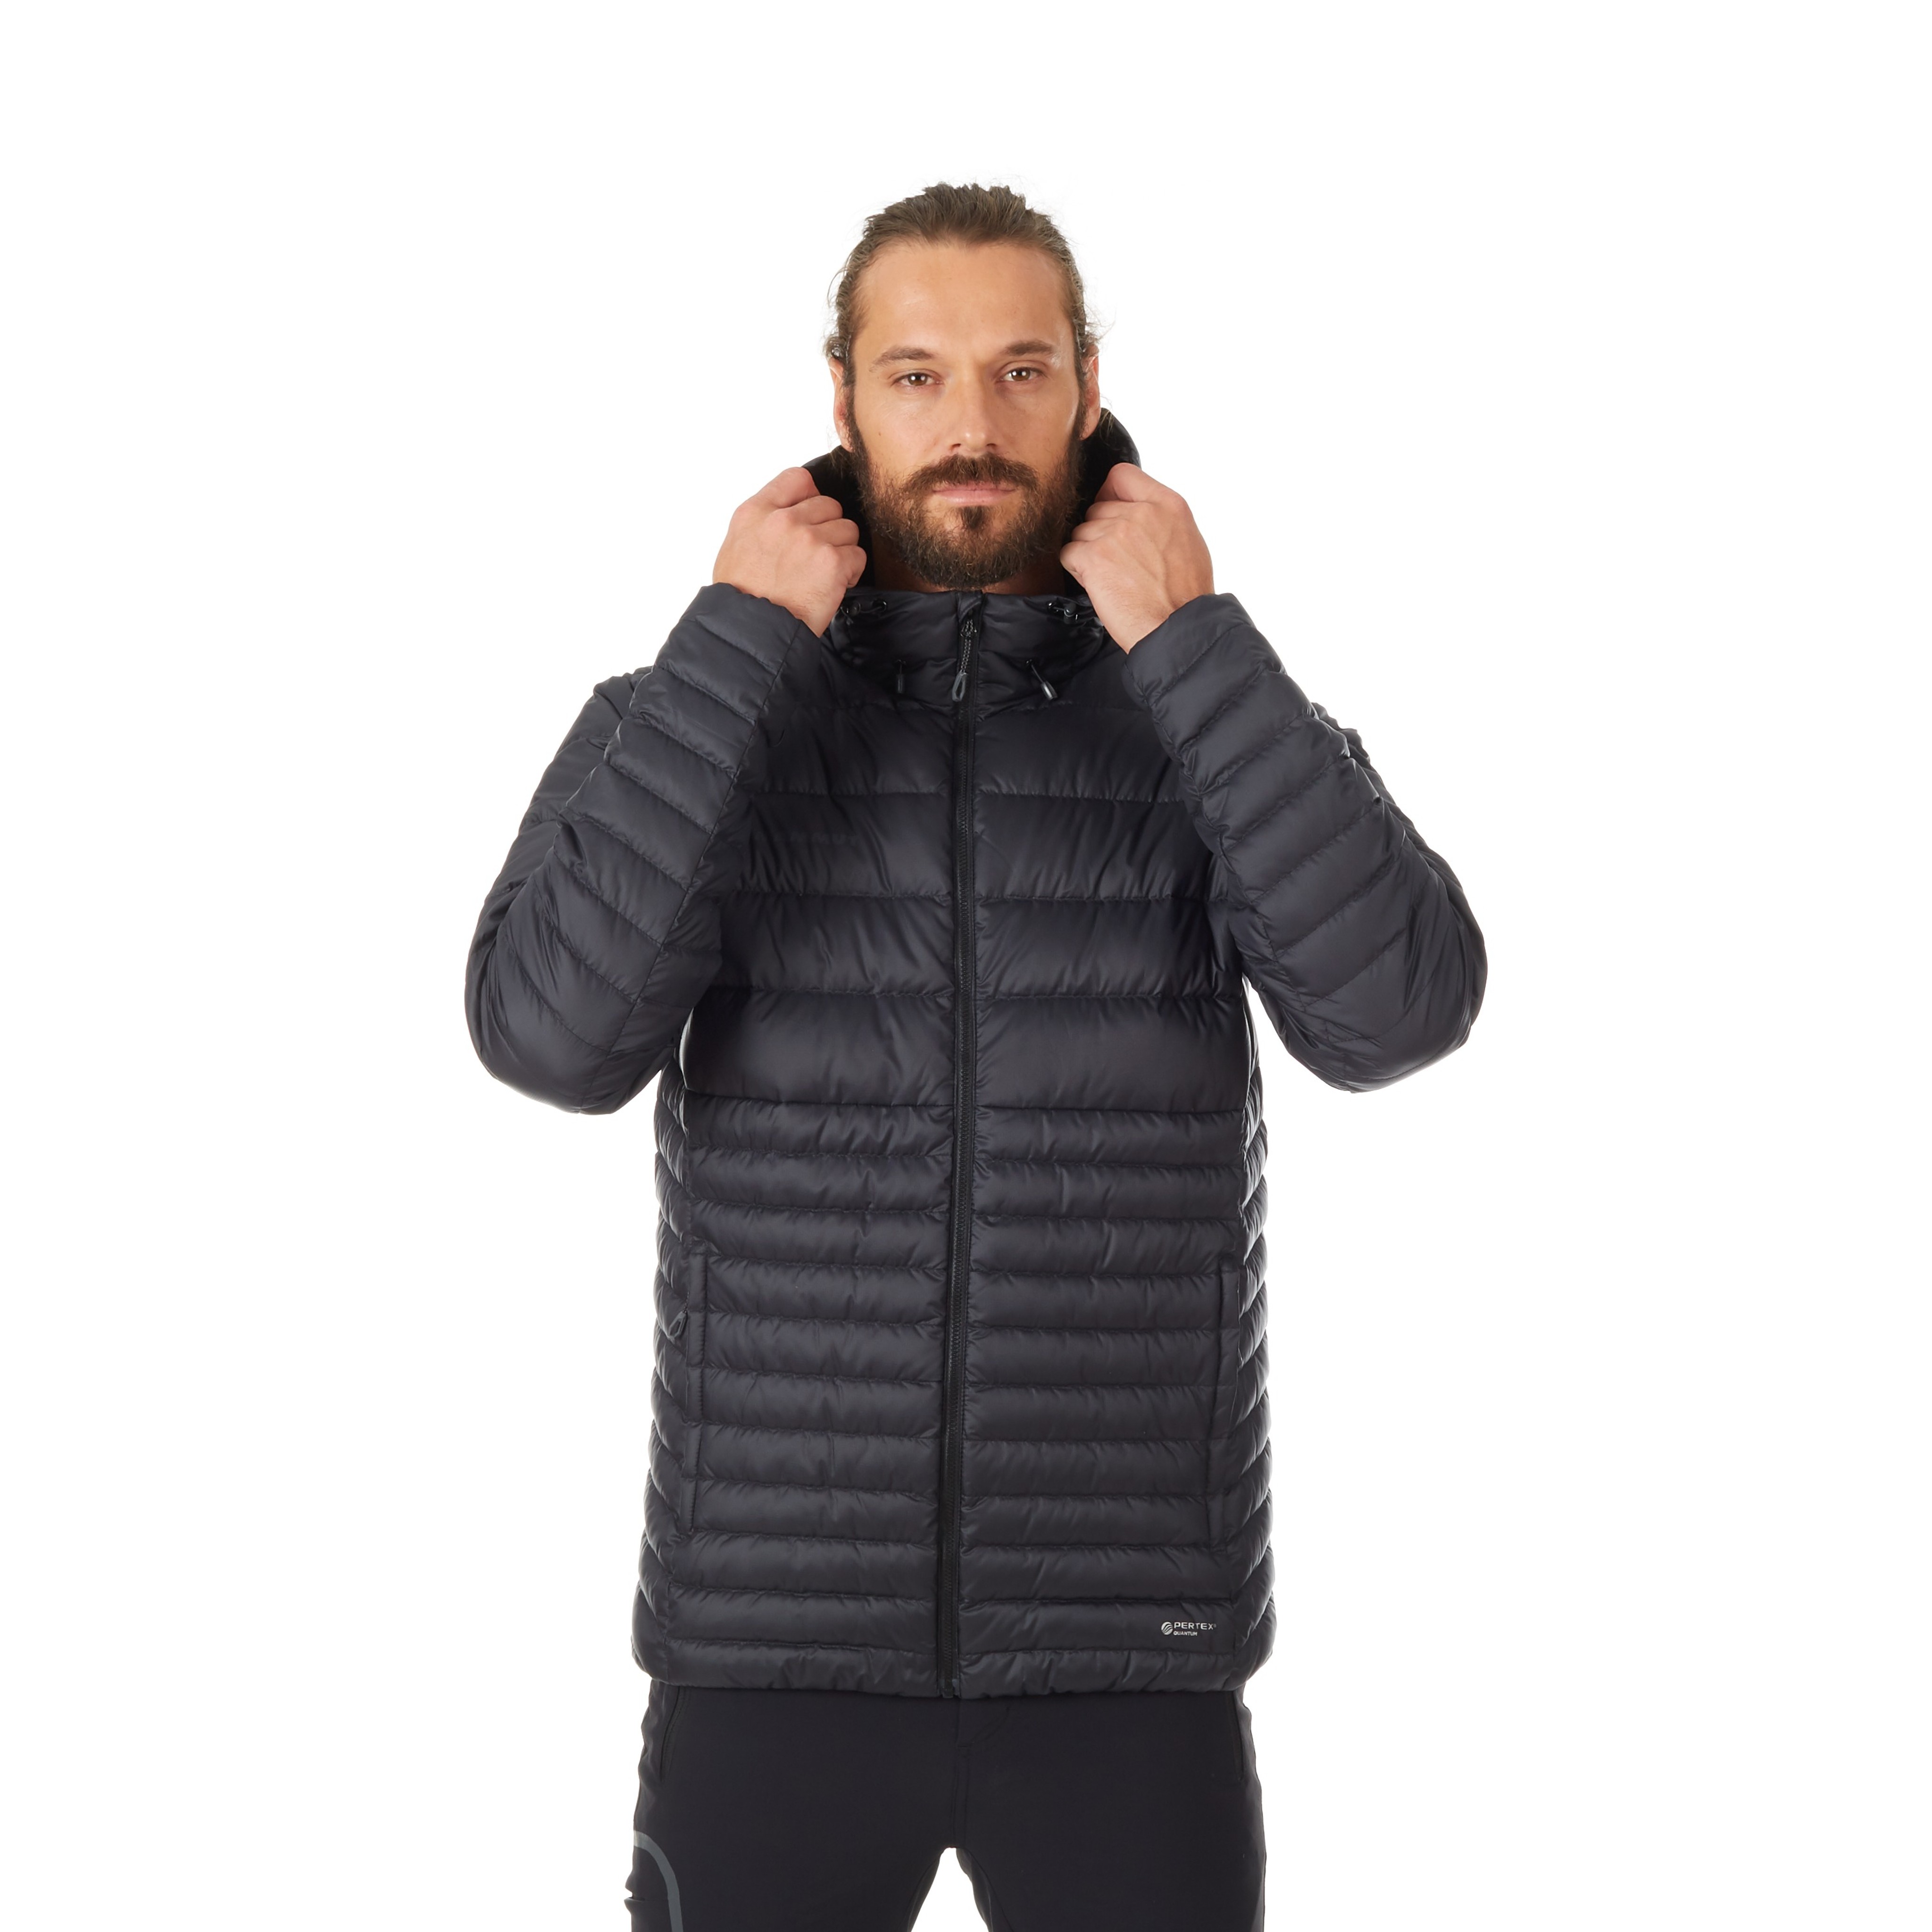 Convey IN Hooded Jacket Men product image